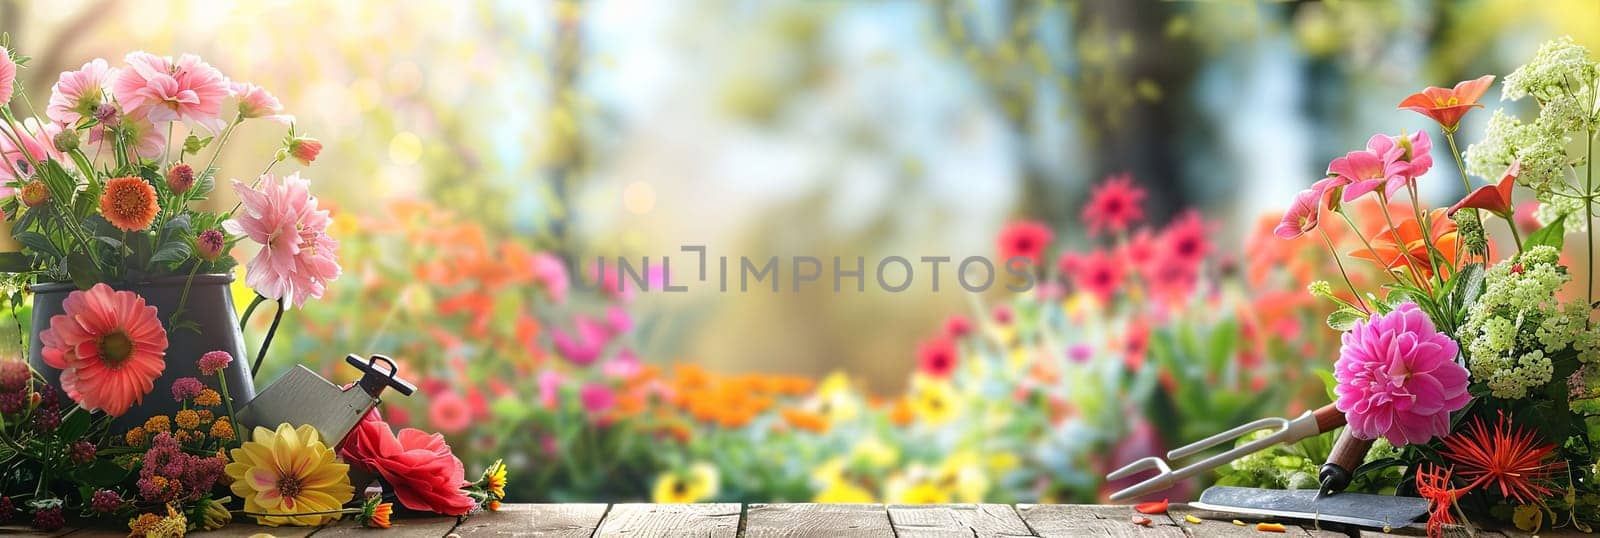 Many vibrant flowers and garden tools arranged on a wooden table, set against a blurred natural backdrop.